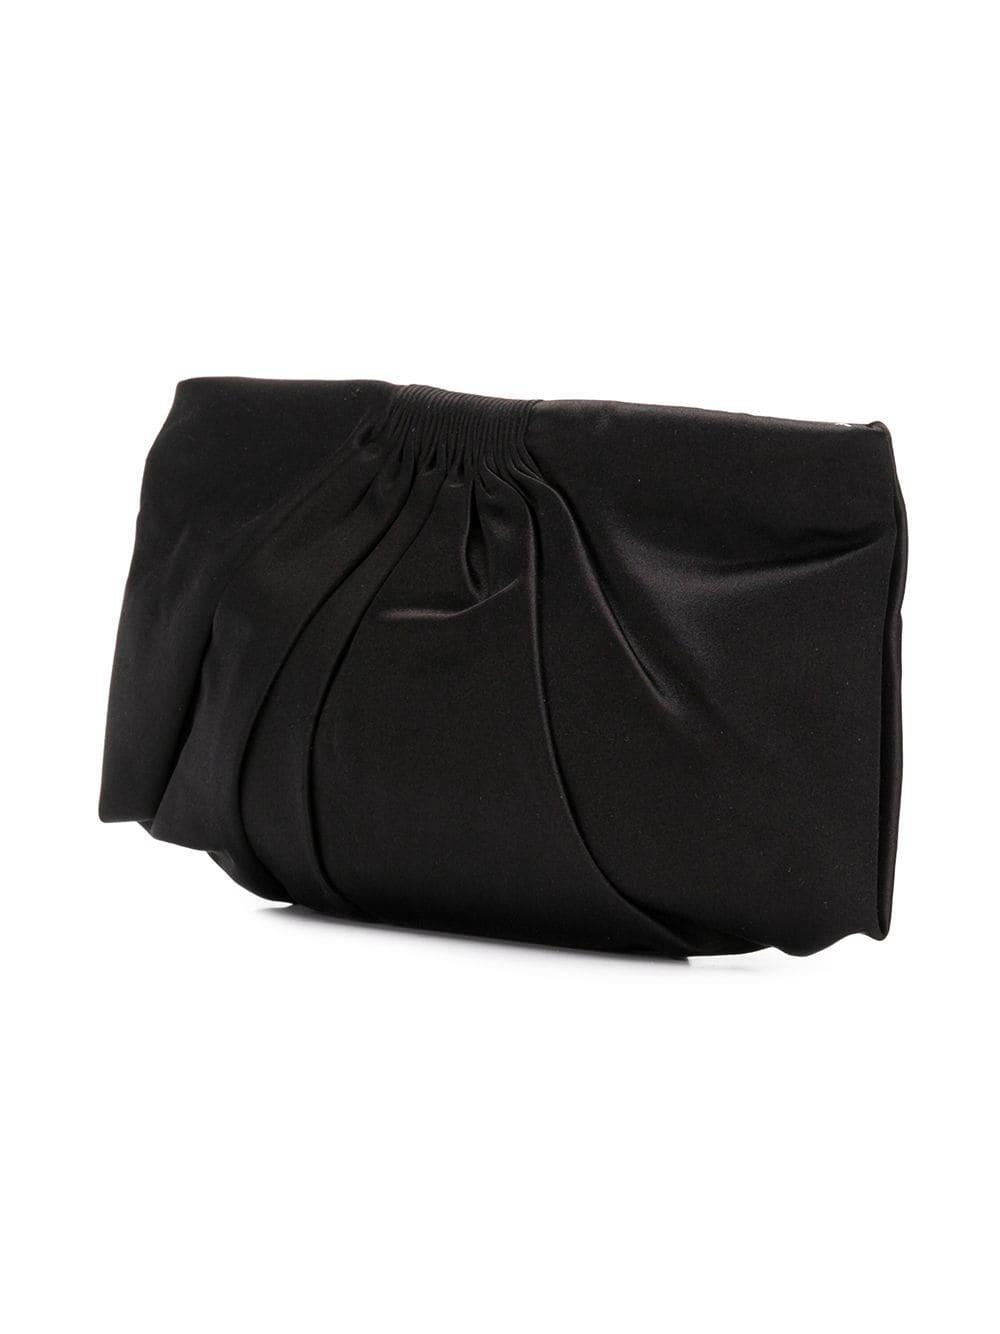 Make a classic statement for cocktail hour with this black satin Chanel clutch featuring a pleated silhouette, ribbed detailing and a top-zip fastening offset by a logo charm and accented by silver-plated metal hardware. The clutch’s main